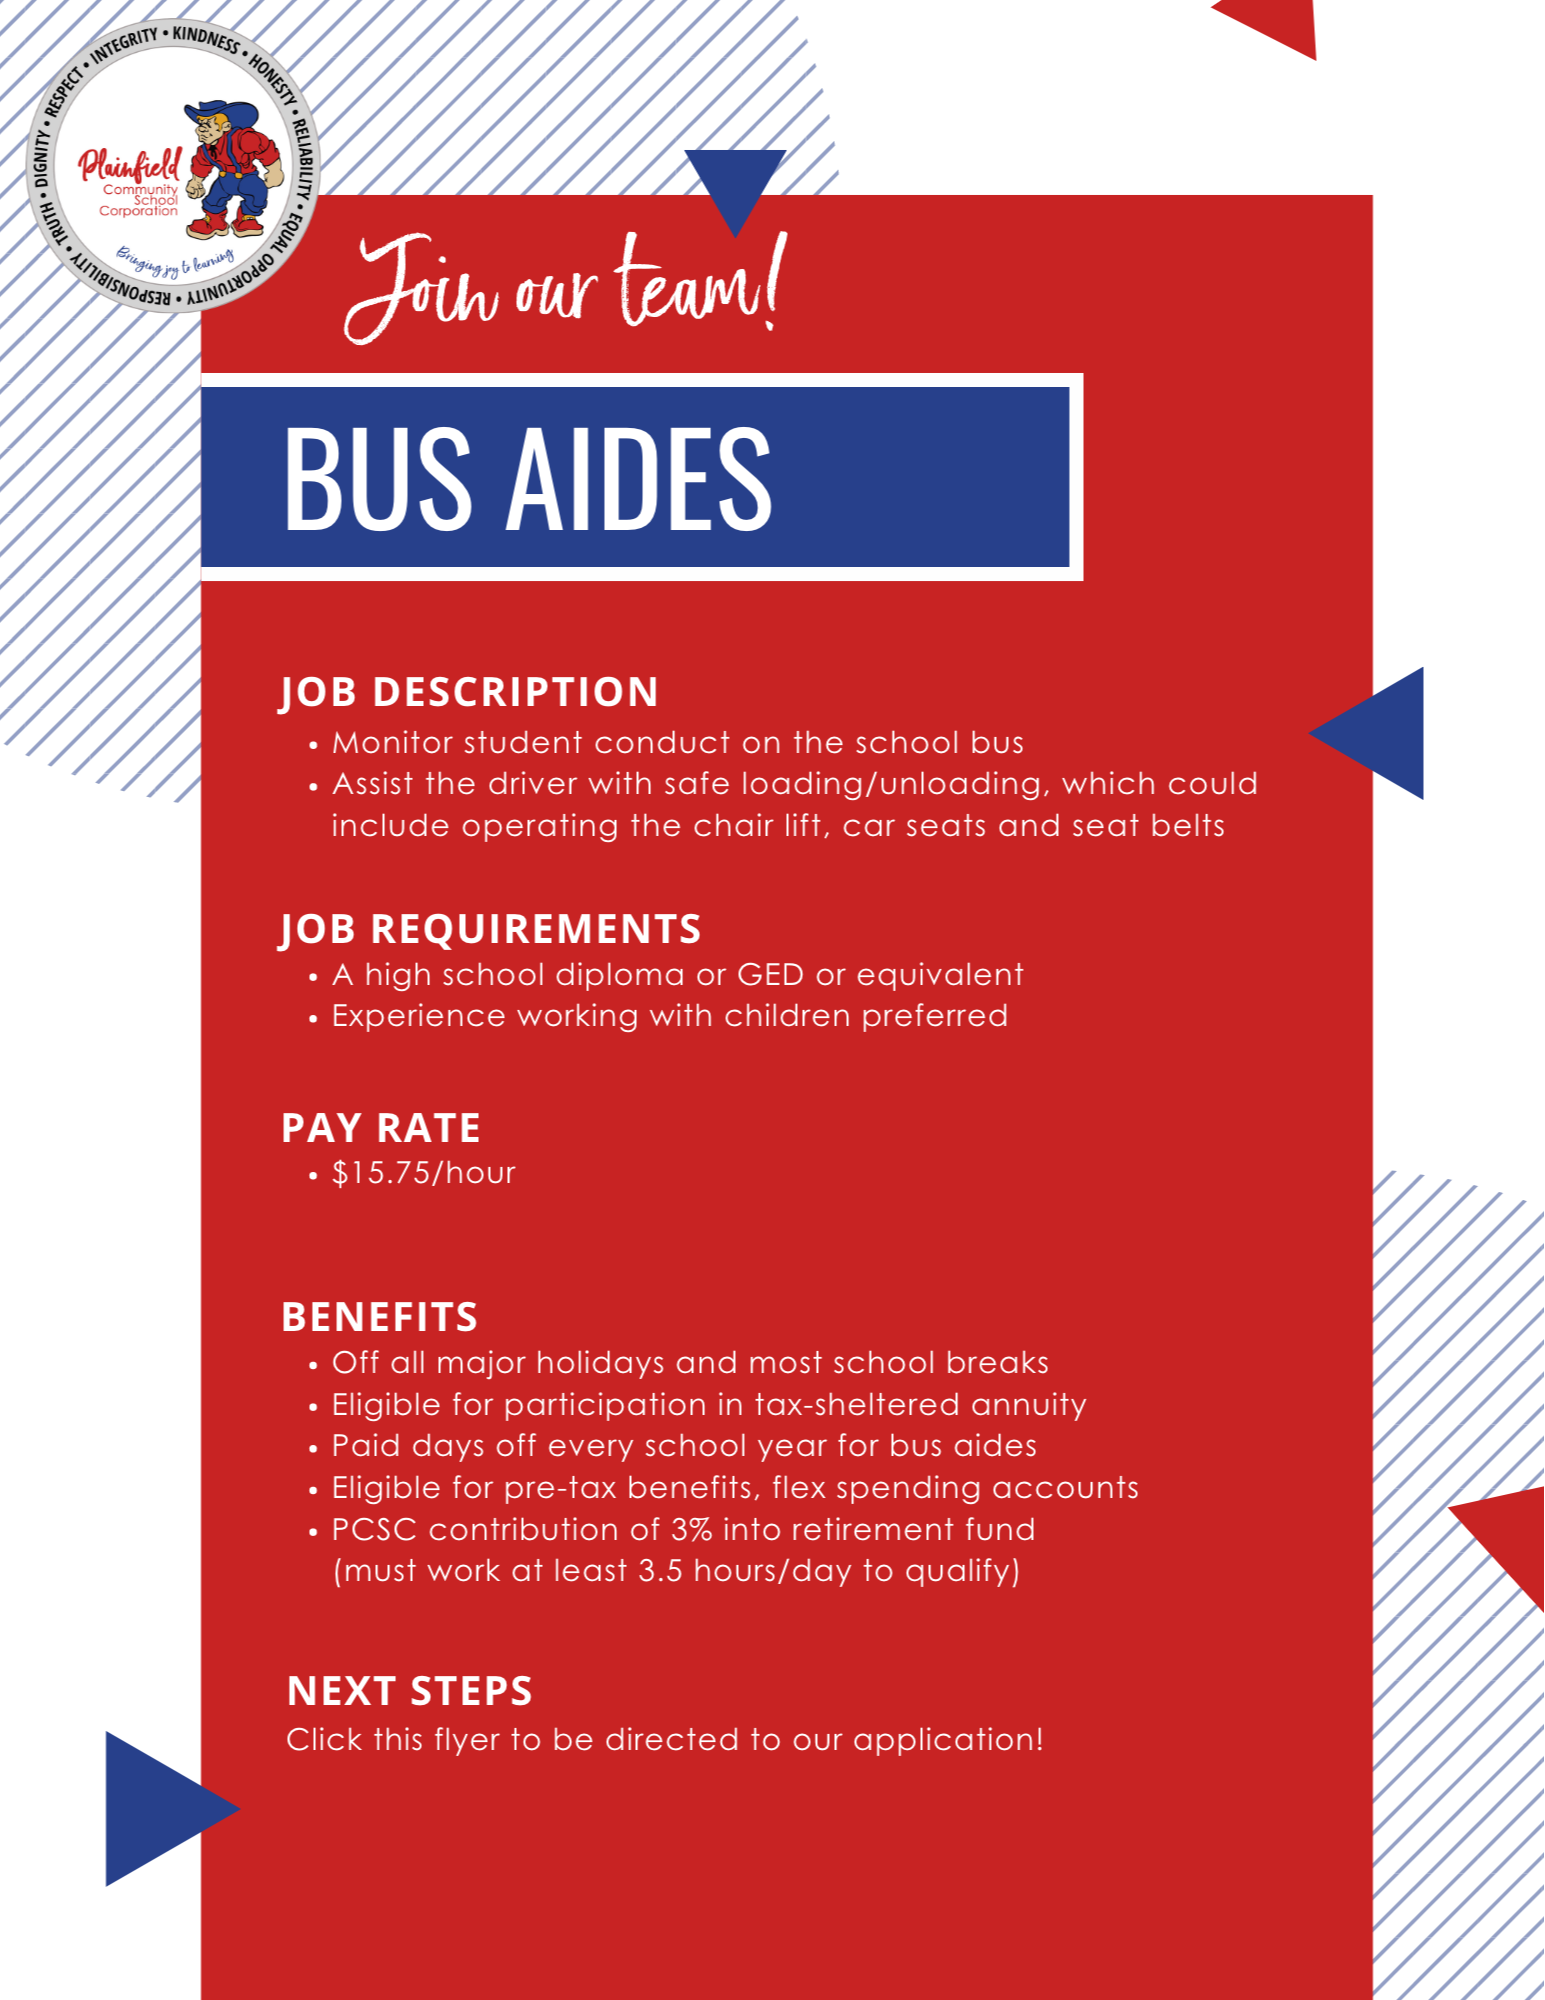 Information about being a Bus Aide with Plainfield Schools